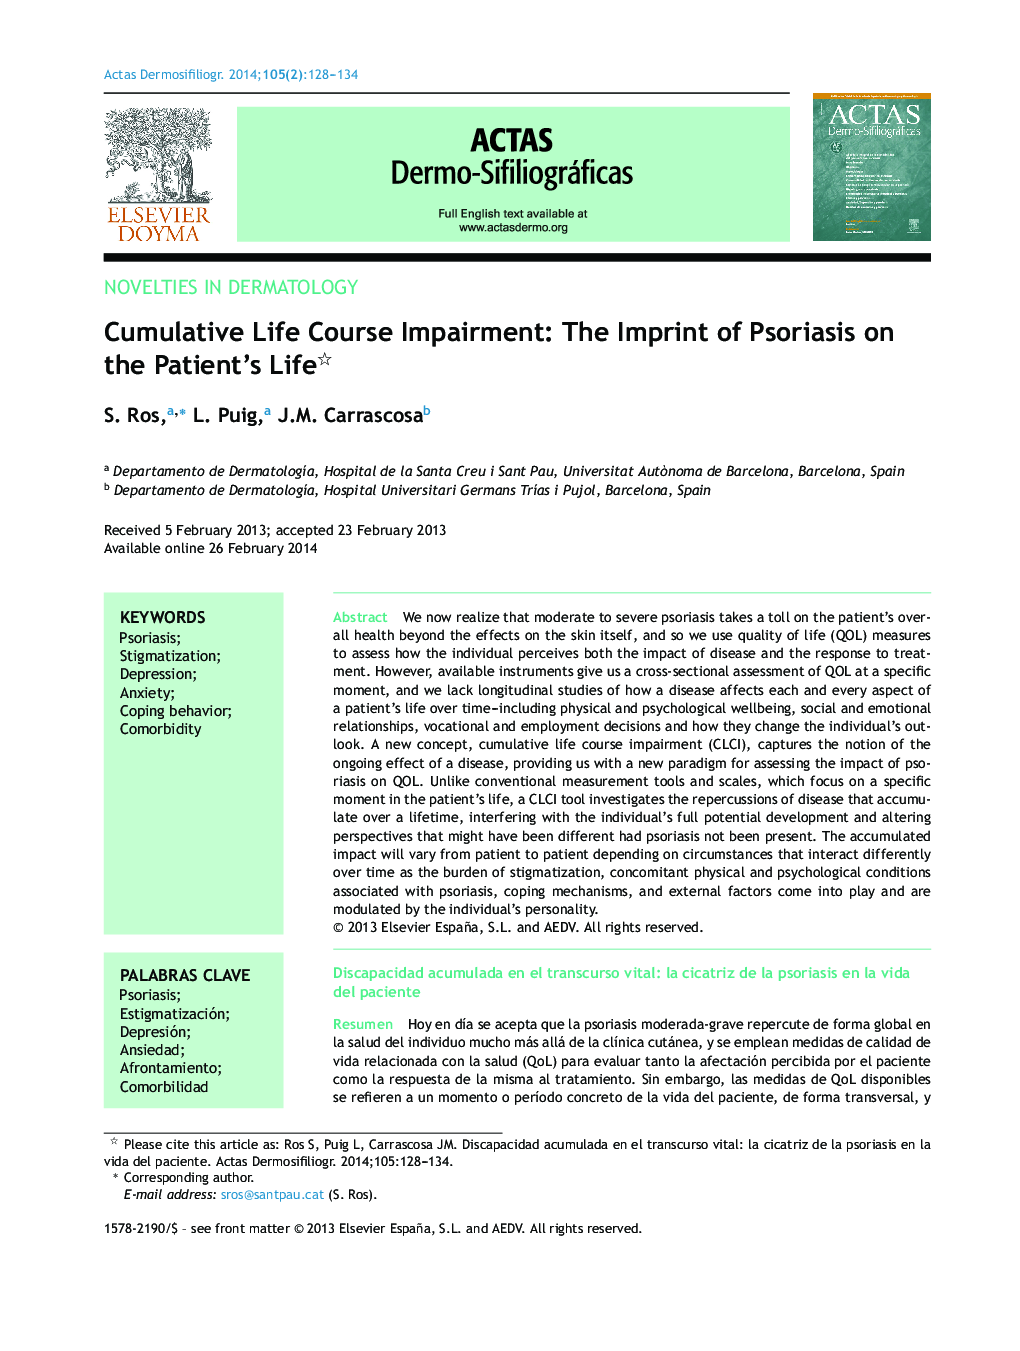 Cumulative Life Course Impairment: The Imprint of Psoriasis on the Patient's Life 